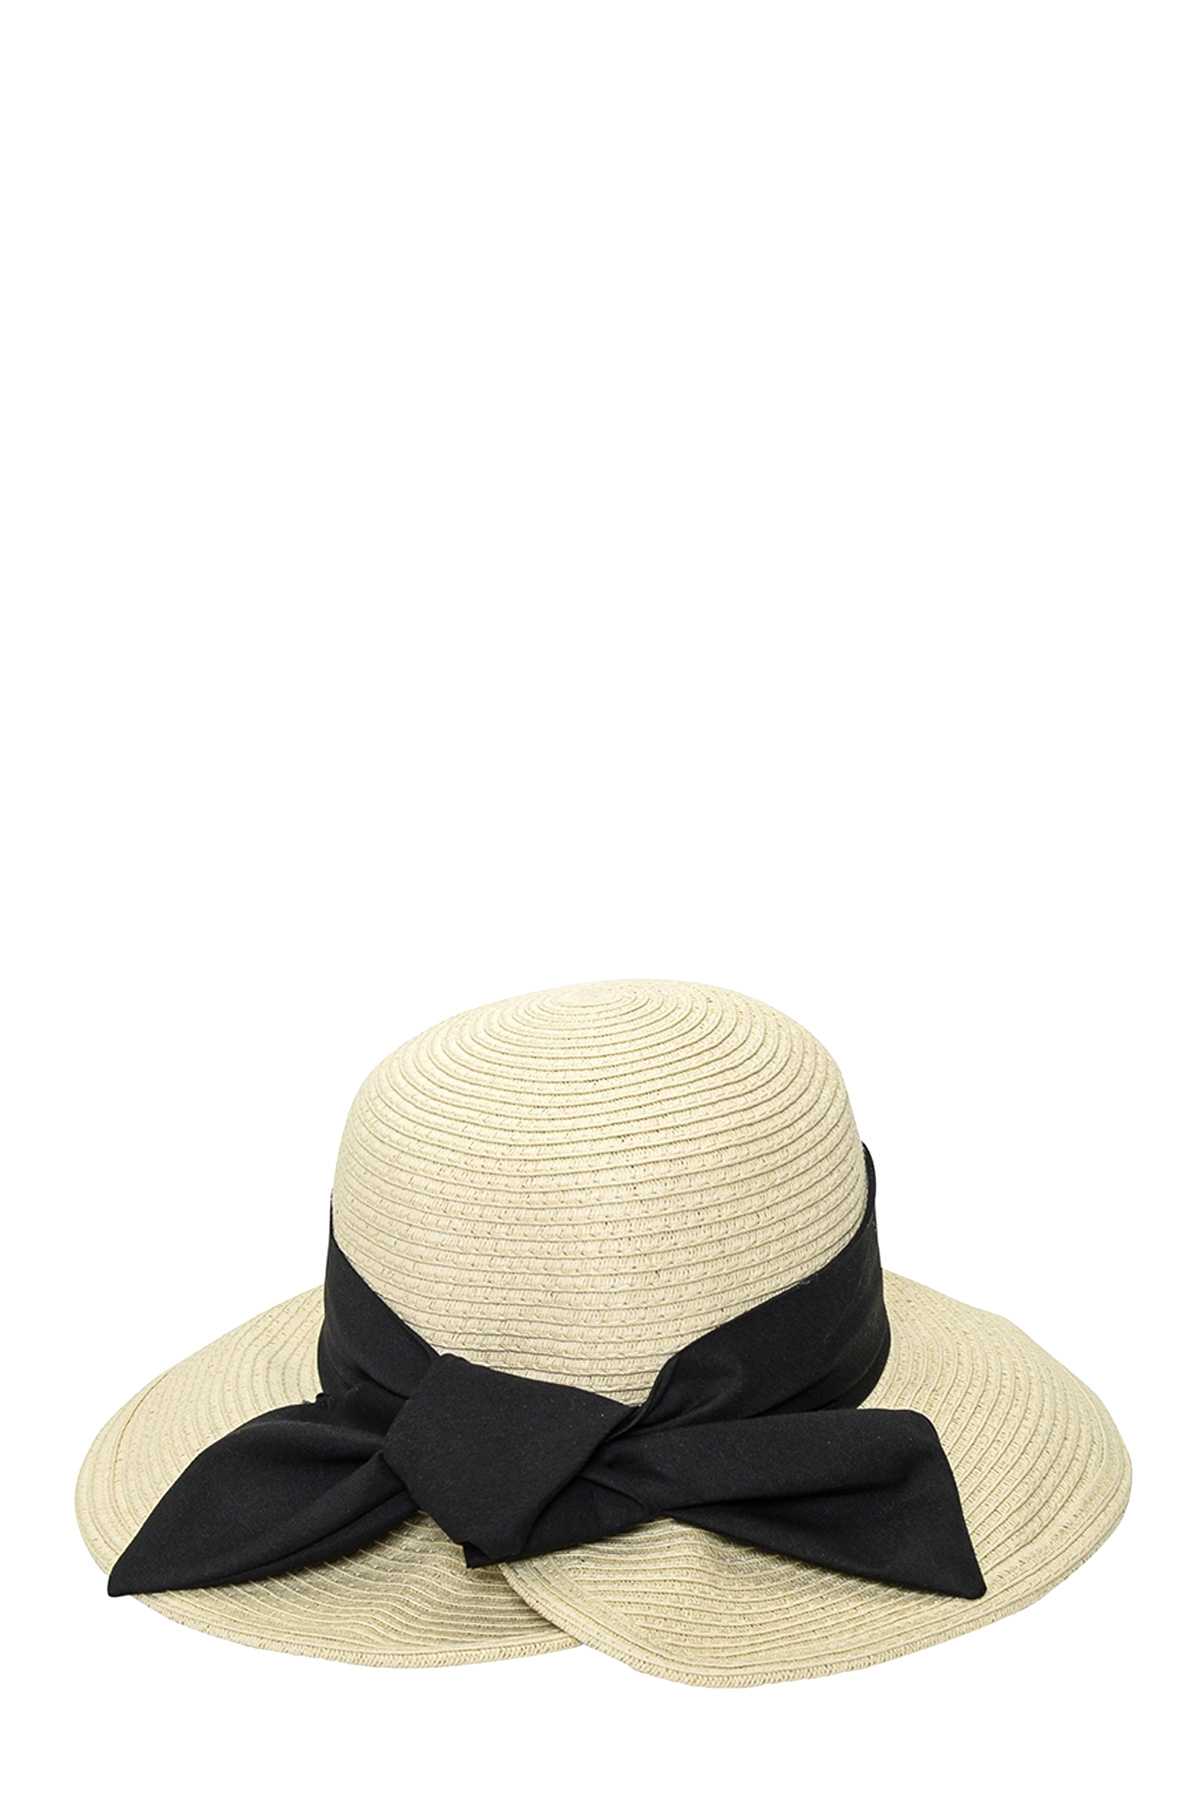 Straw Bucket Hat with Black Ribbon Band